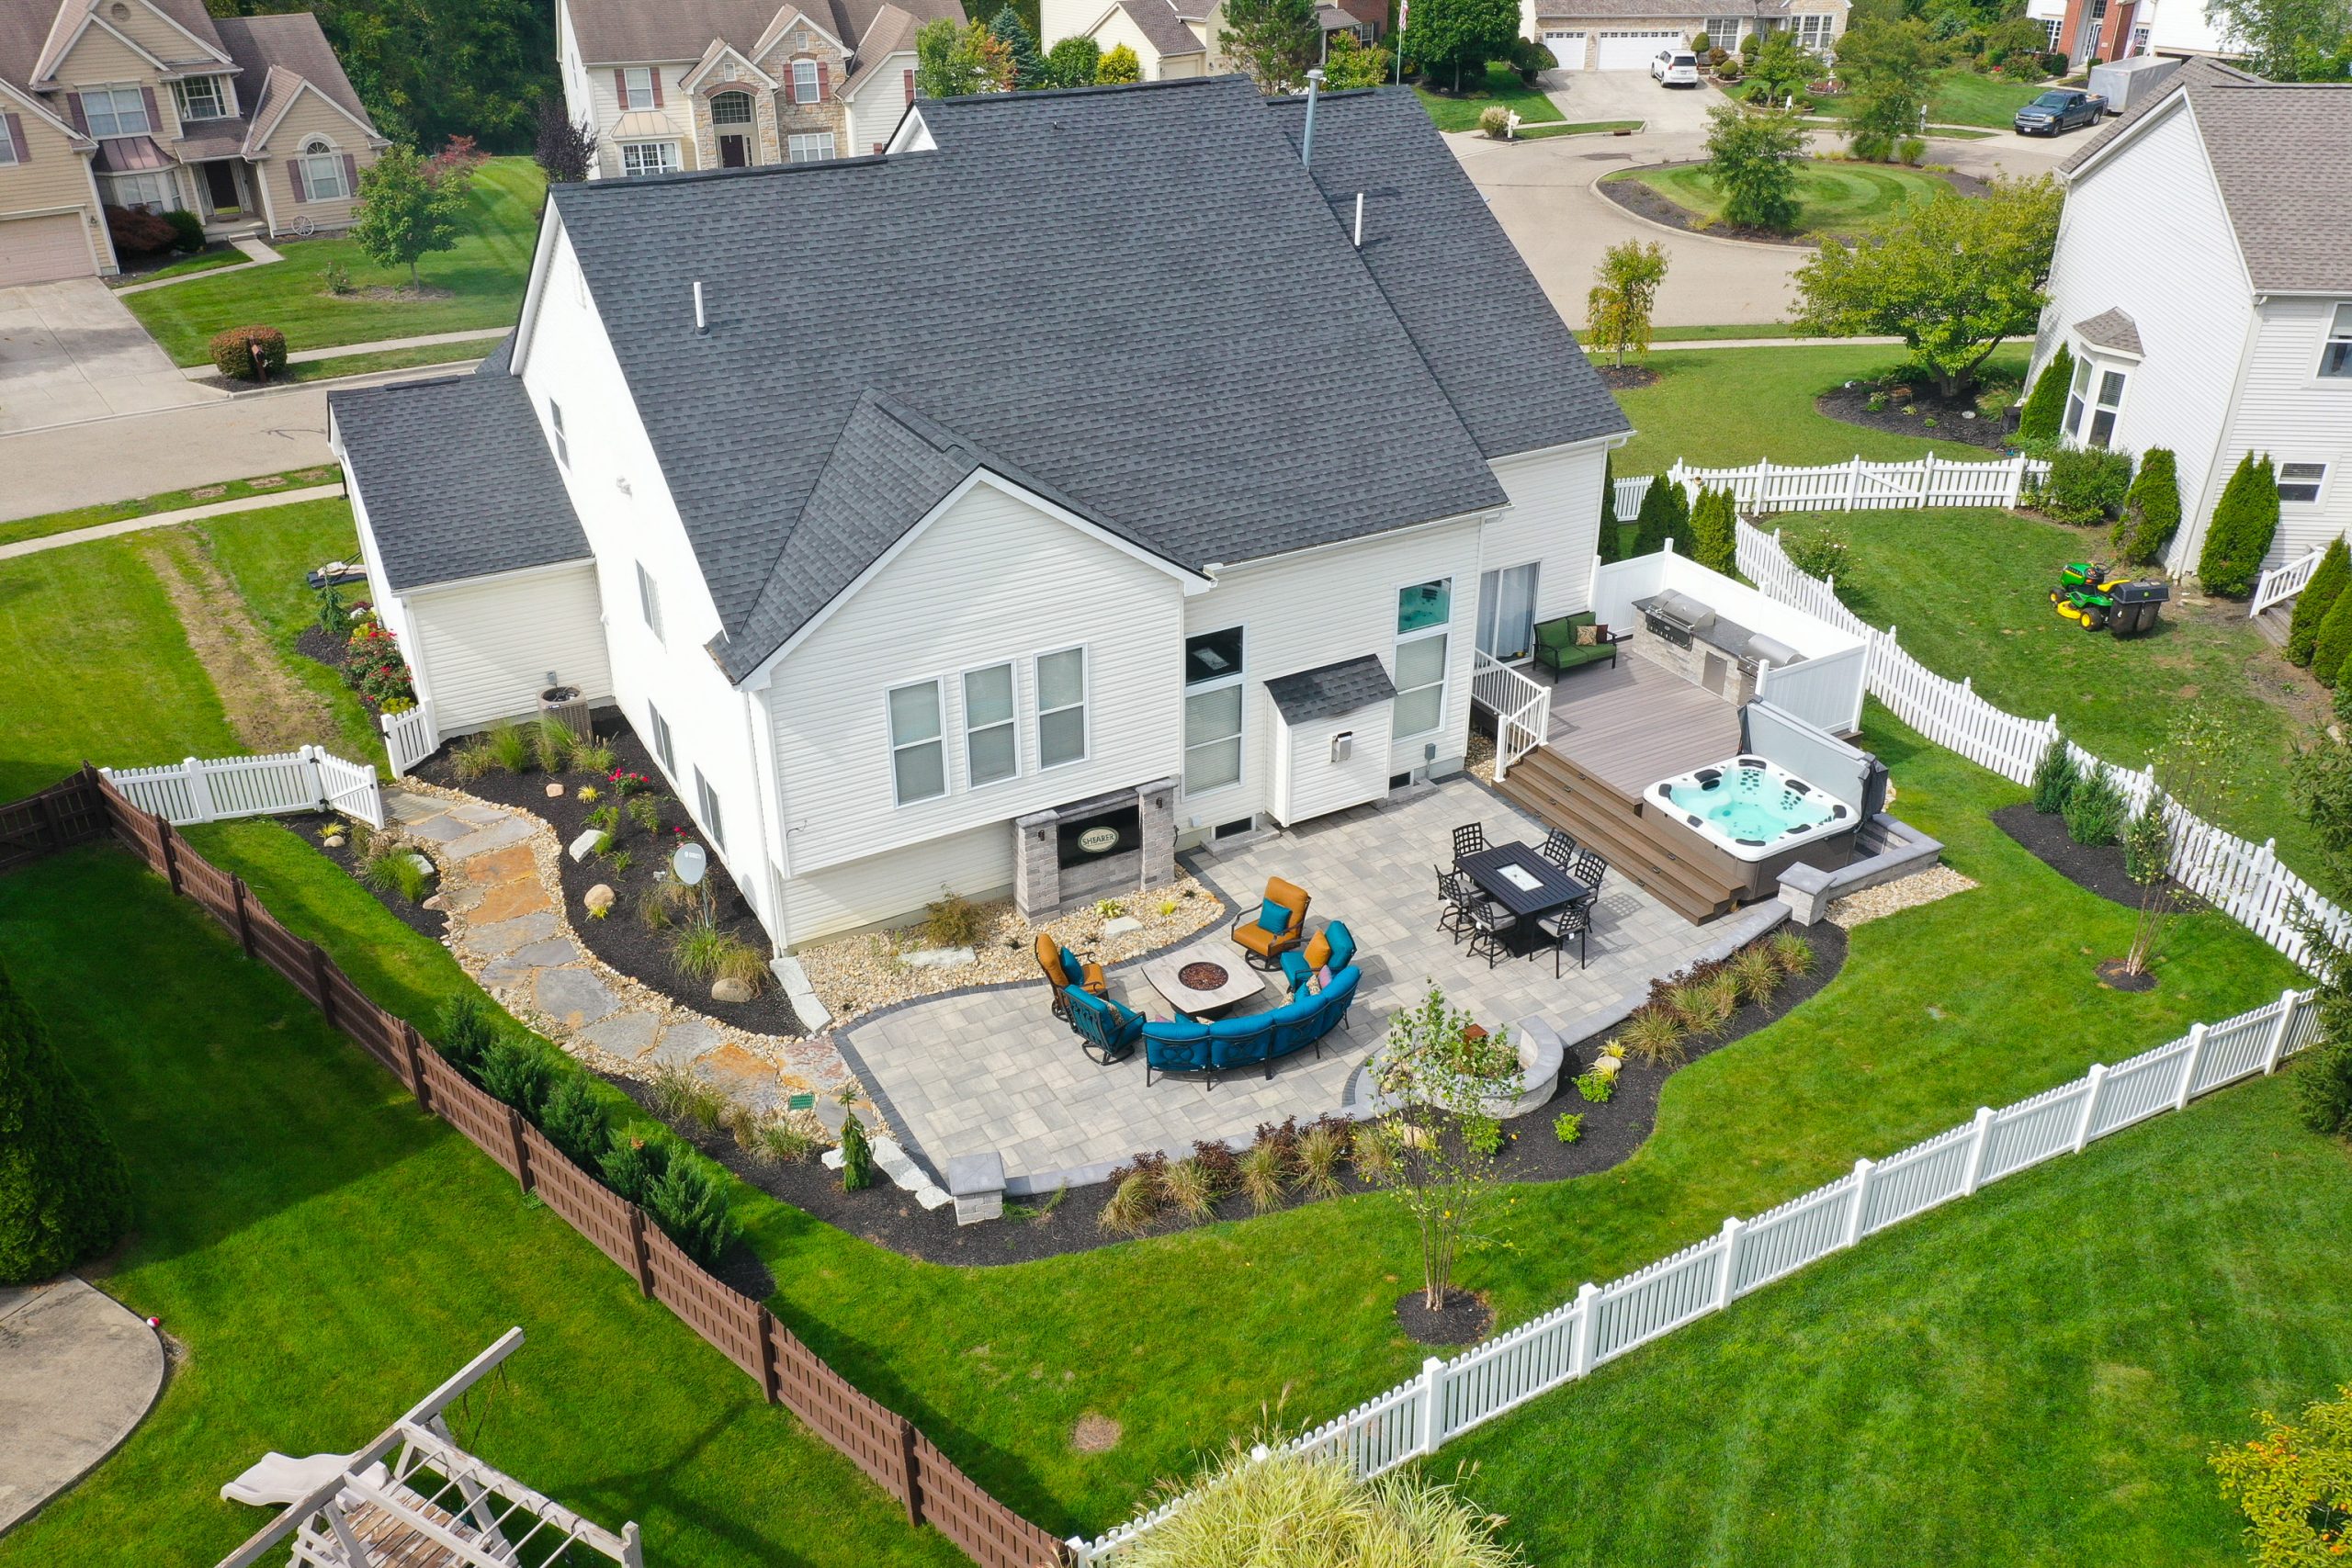 Top view of a community with several homes surrounded by lawns, shrubs and trees.